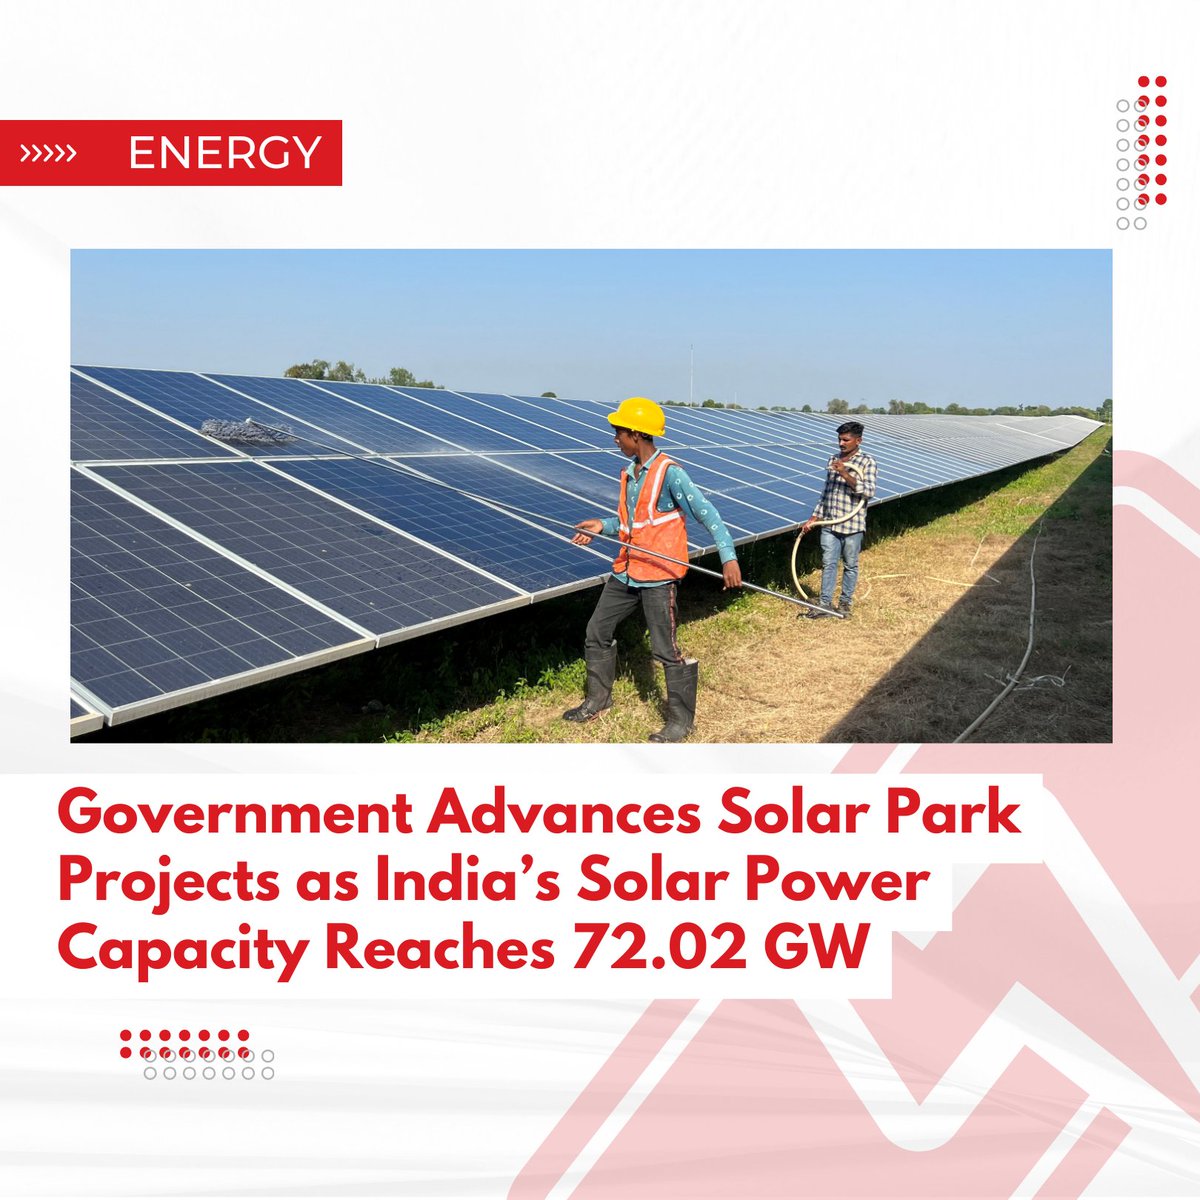 India has achieved a solar power capacity of 72.02 GW, comprising 55.71 GW from ground-mounted, 11.08 GW from rooftop, 2.55 GW from hybrid projects, and 2.68 GW from off-grid solar, with notable growth since 2019-20 in Gujarat, Karnataka, and Rajasthan. Private sector